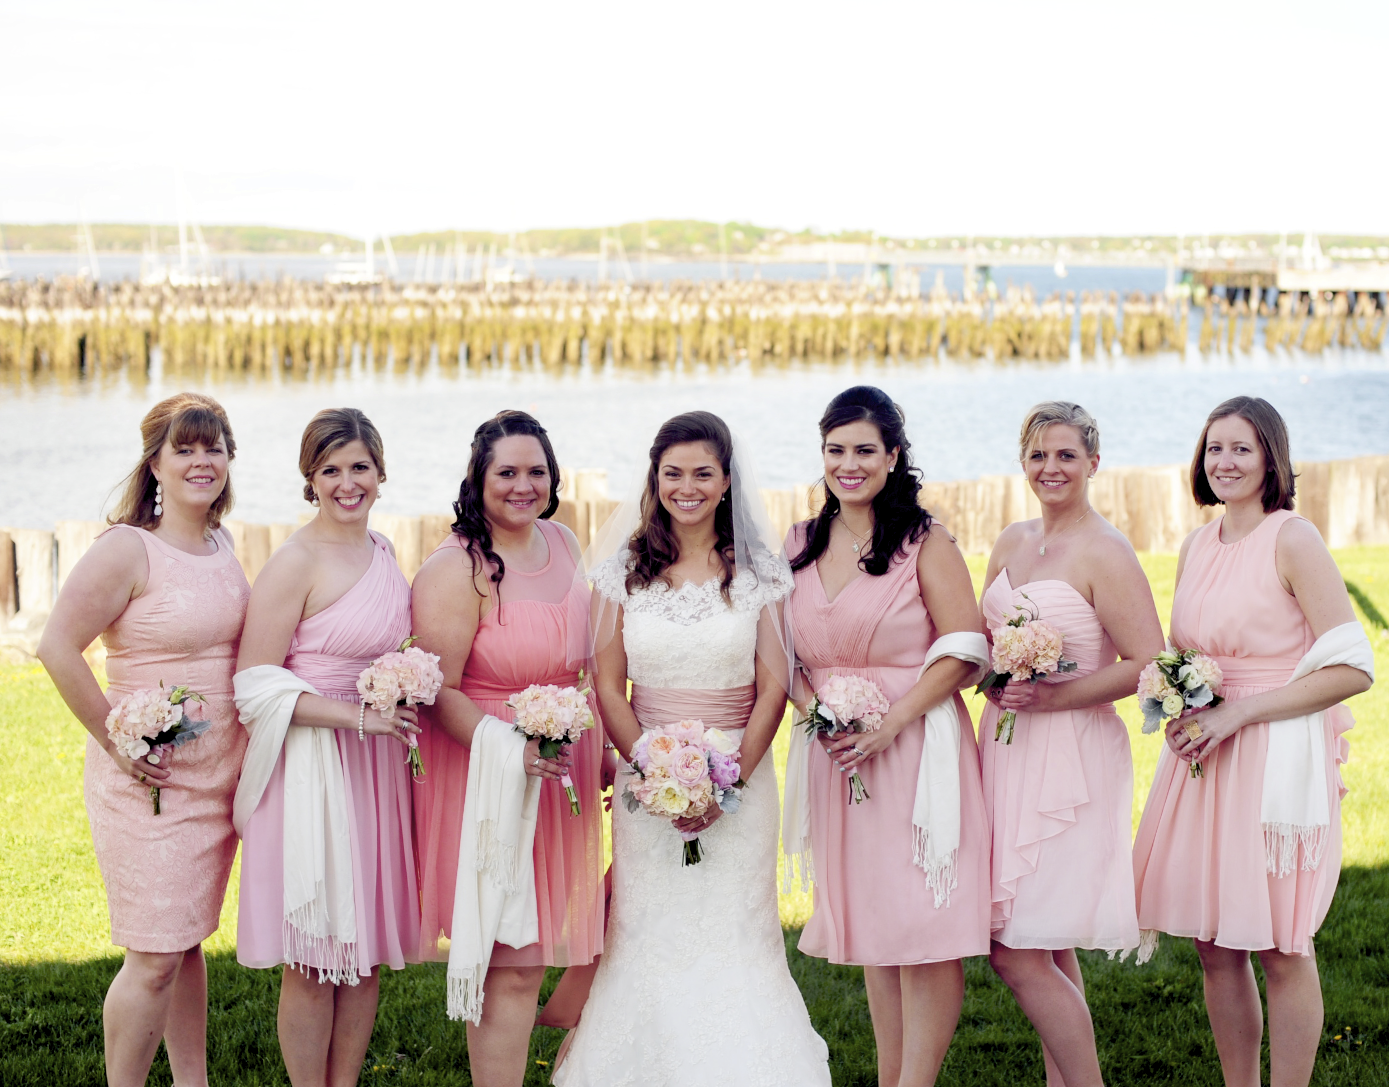 Hillary's bridesmaids wore different shades of pink in different styles, but coordinated with matching white pashminas!